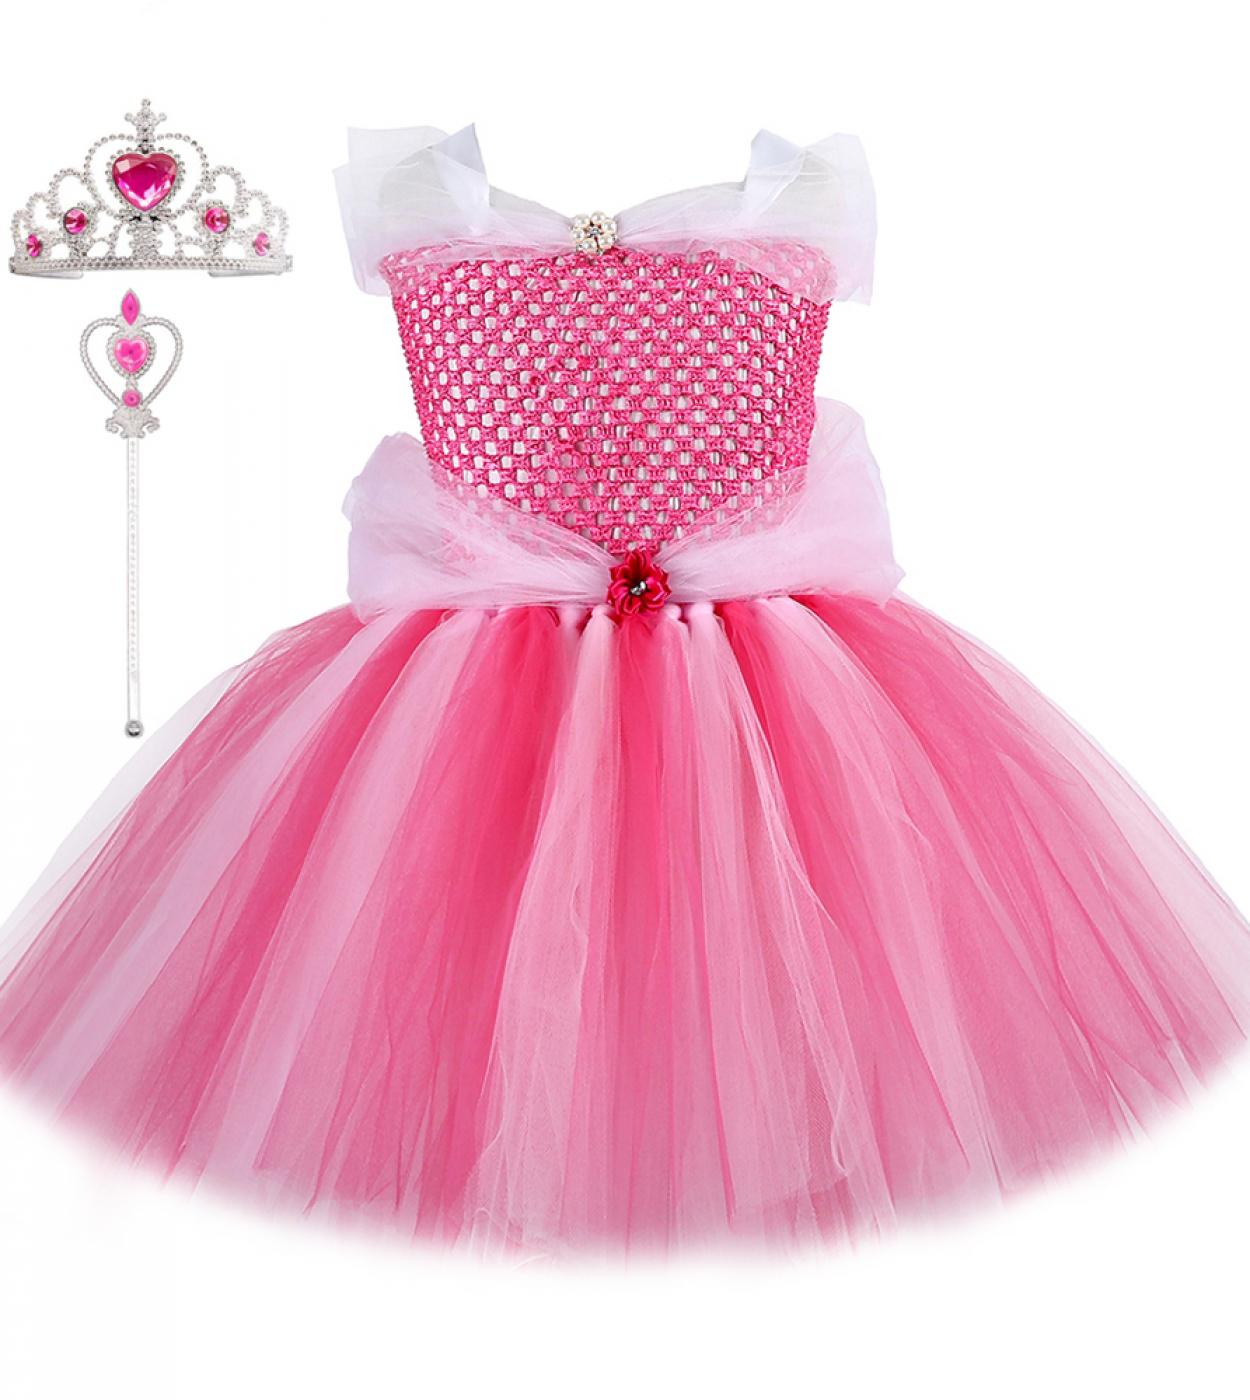 Sleeping Beauty Princess Dresses For Girls Tutu Fancy Dress Up Costume For Kids Girl Cosplay Costumes Children New Year 